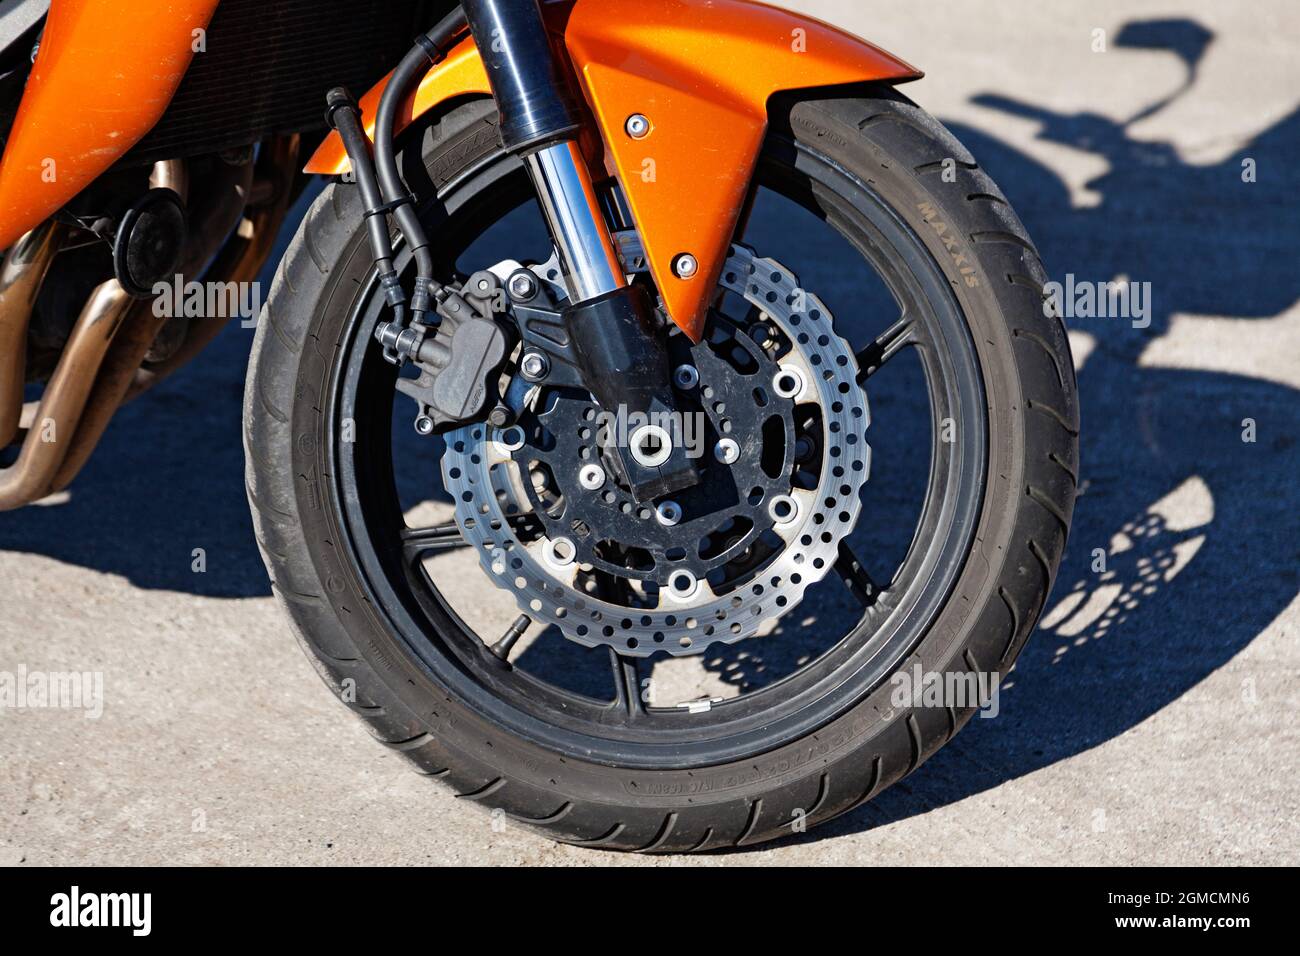 Umea, Norrland Sweden - May 21, 2020: the front wheel of an orange motorcycle Stock Photo